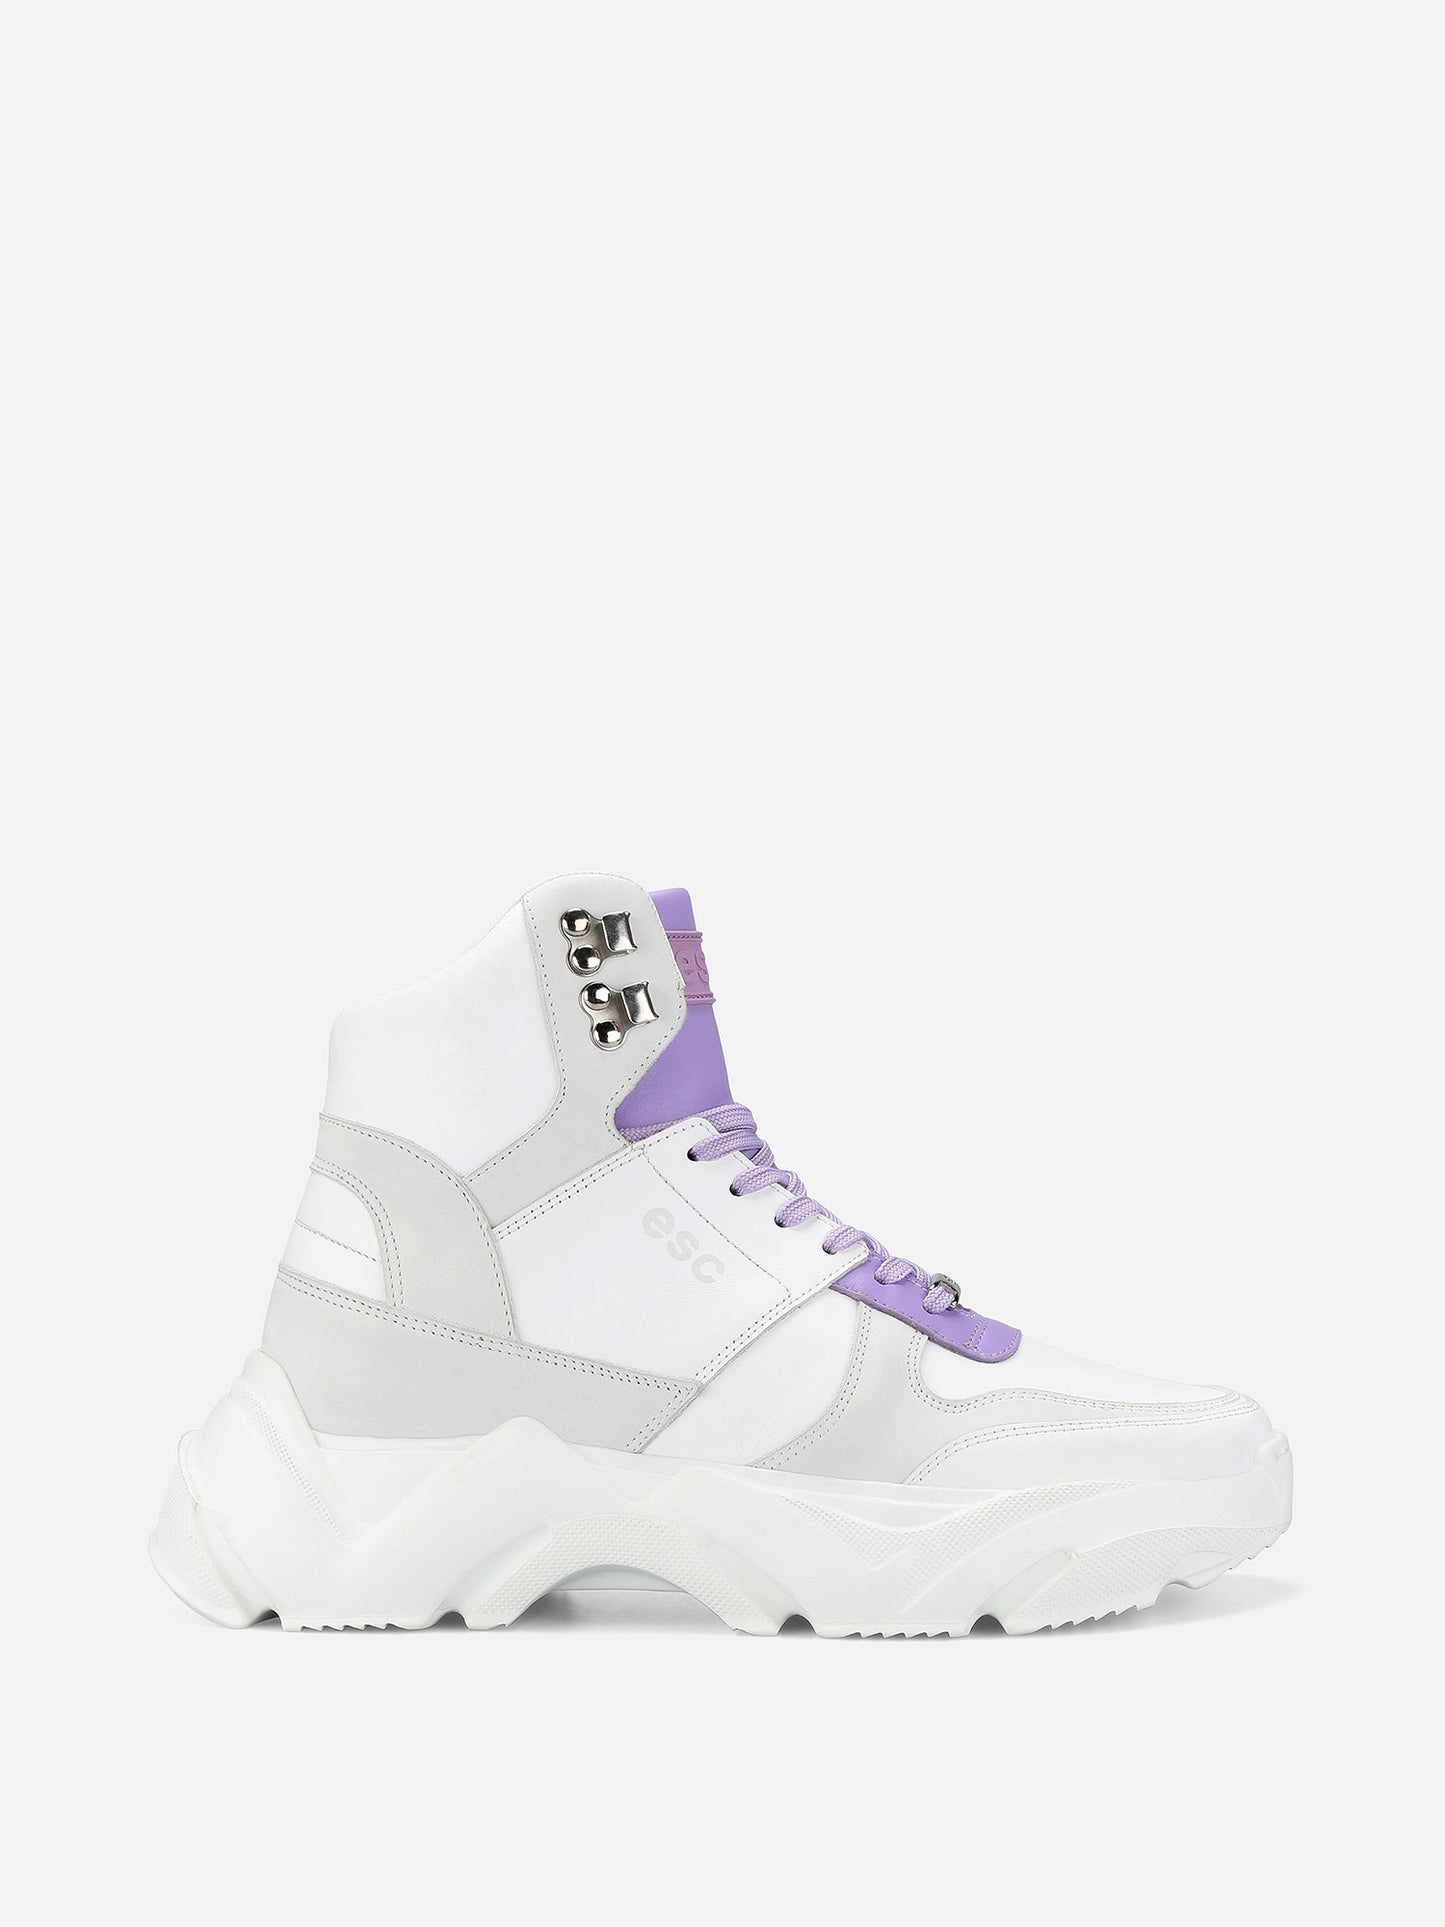 SPECTRUM Chunky Leather Sneakers - Lilac